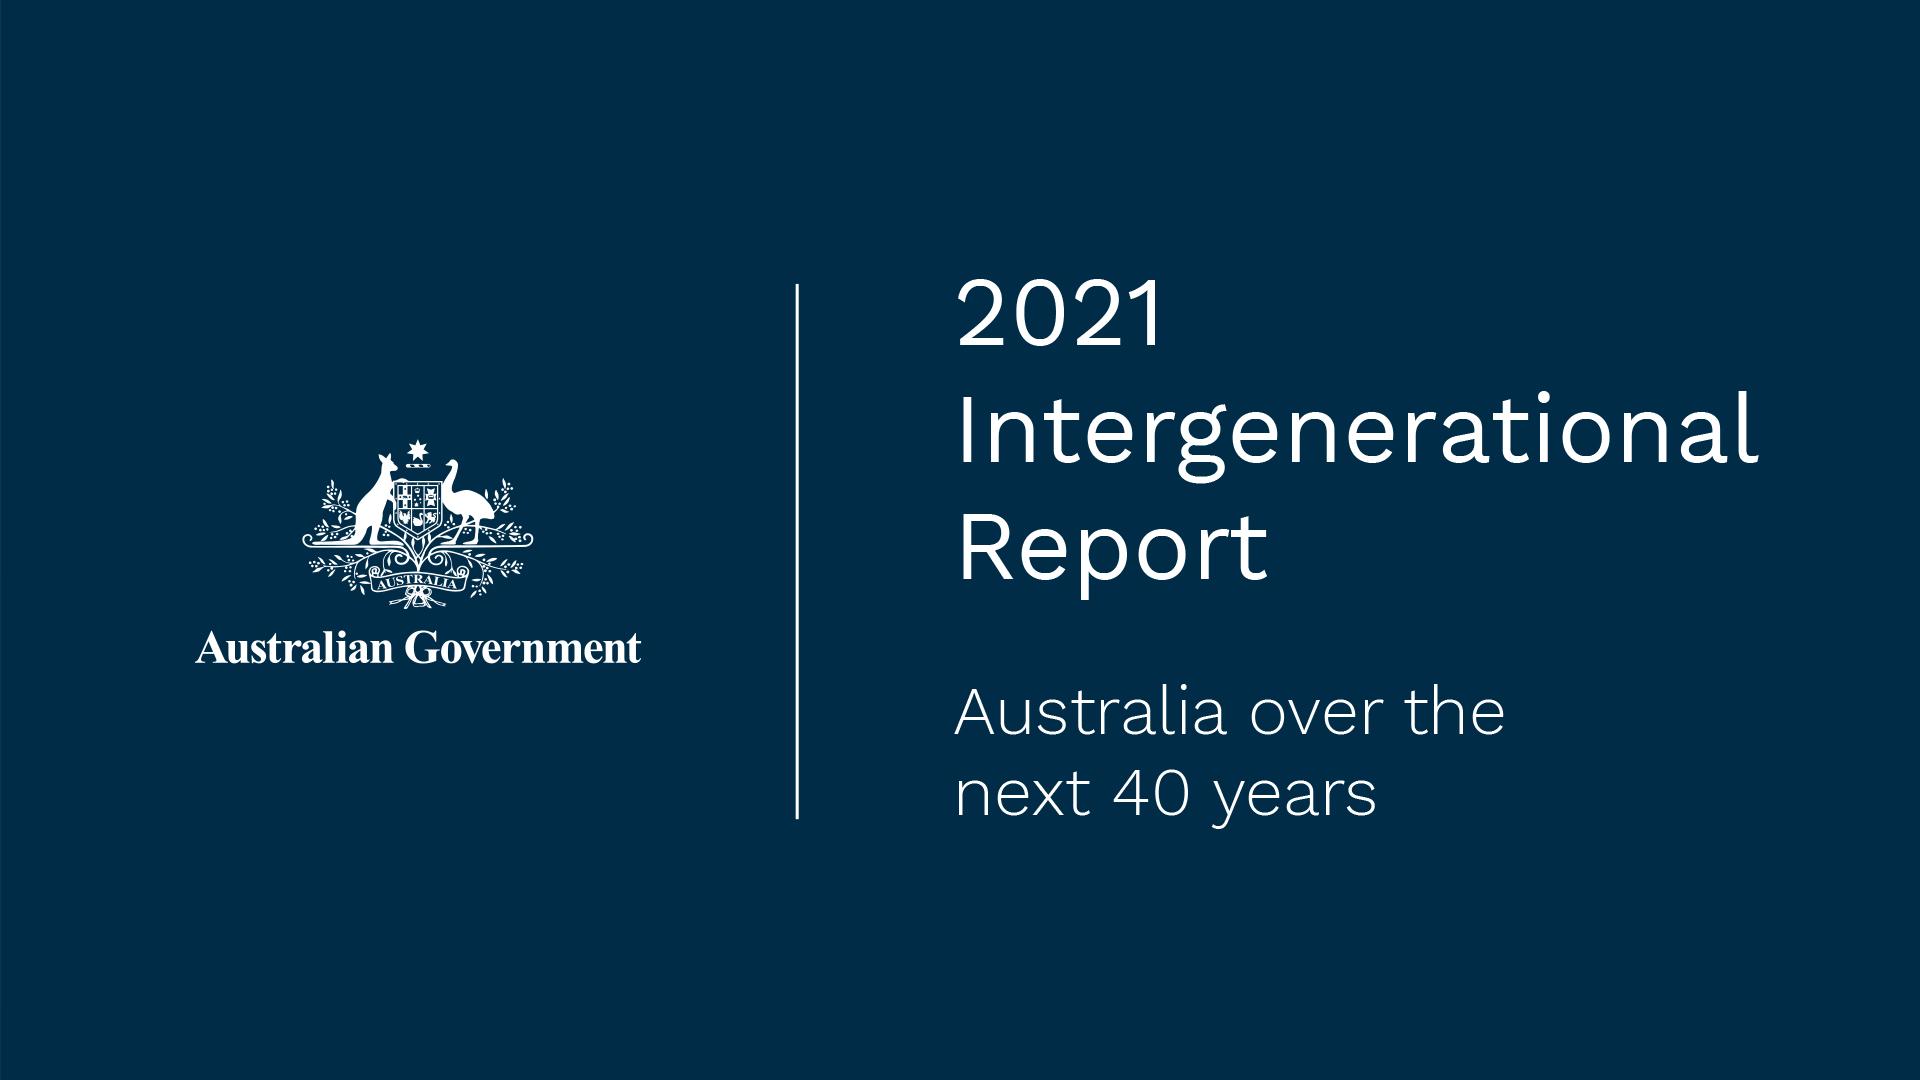 2021 Intergenerational Report, Australia over the next 40 years